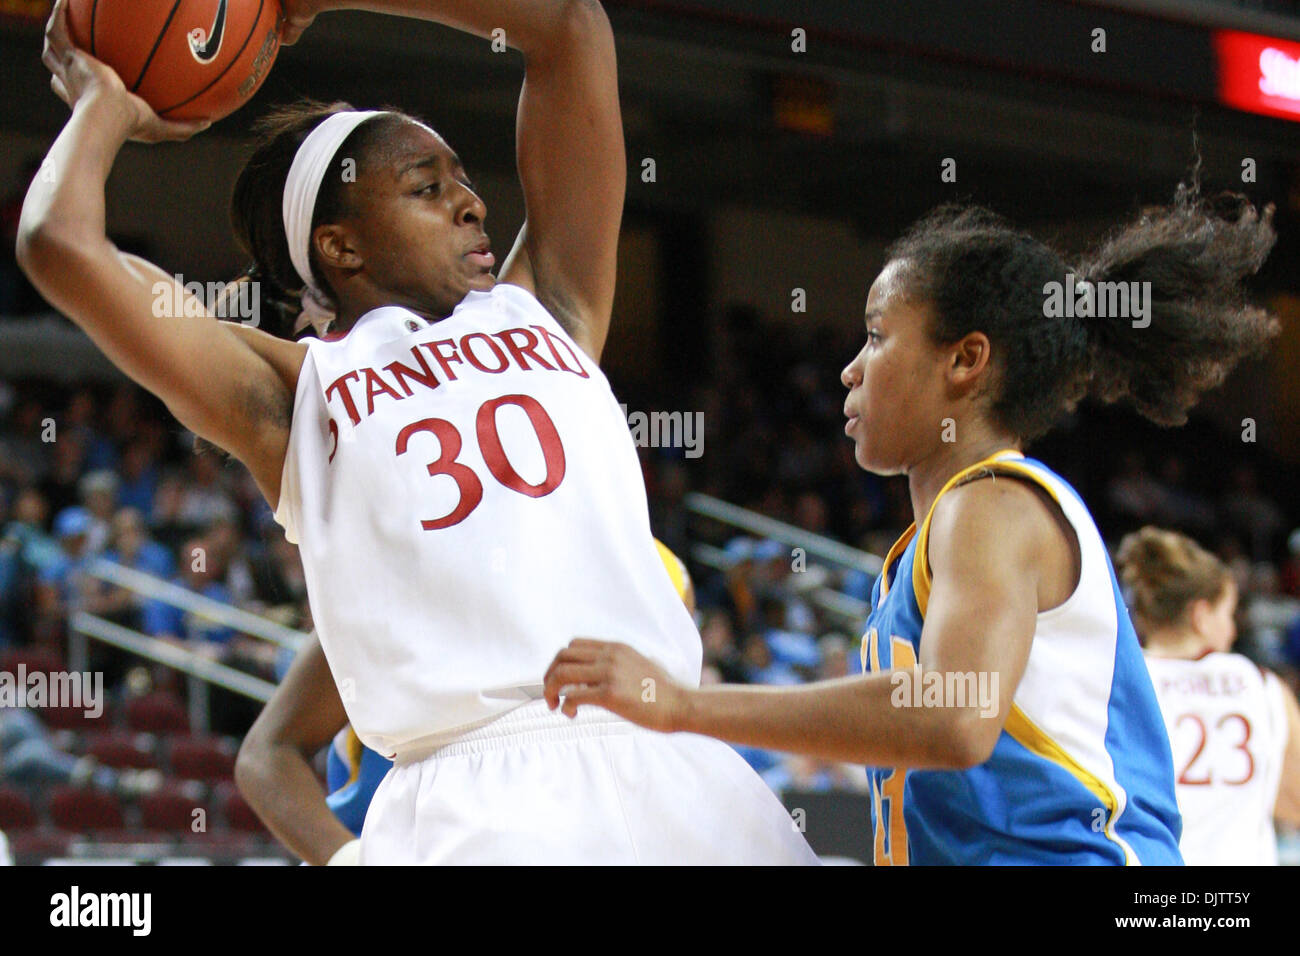 14 March 2010: Nnemkadi Ogwumike #30 looks for an open teammate while being defended by Doreena Campbell during the State Farm Pac-10 Womens Basketball Tournament championship match between Stanford and UCLA at the Galen Center in Los Angeles, California. Stanford defeated UCLA with ease, the final score was 70-46.  Mandatory Credit: Brandon Parry / Southcreek Global (Credit Image: Stock Photo